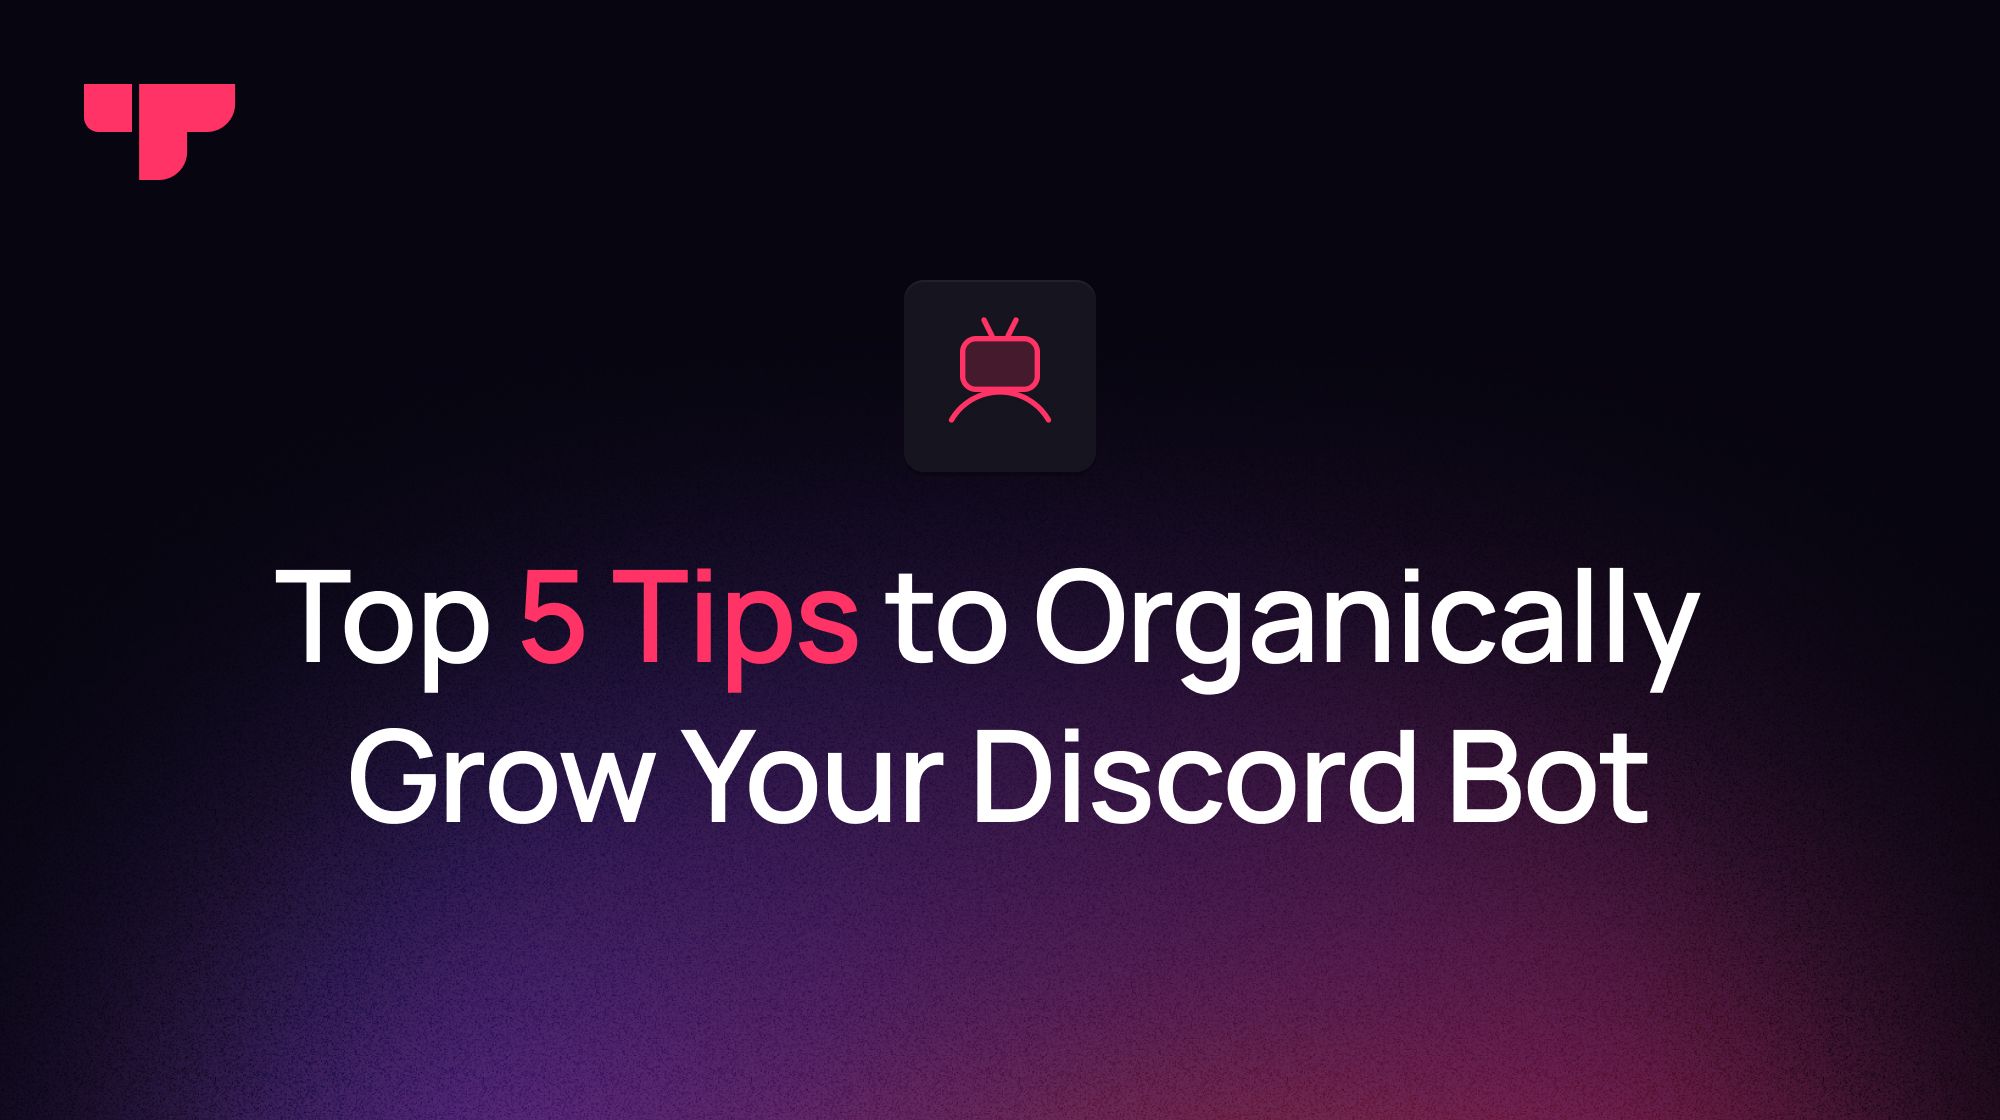 Top 5 Tips to Organically Grow Your Discord Bot